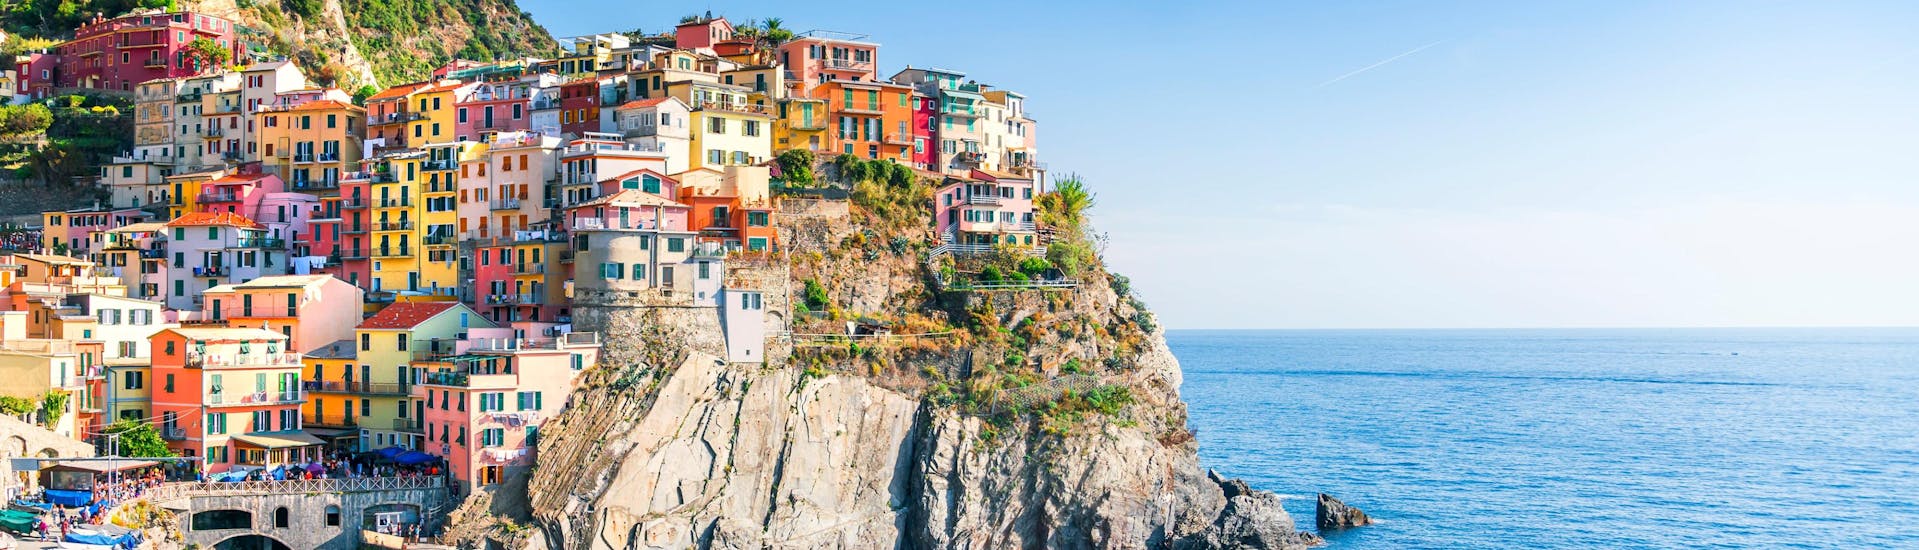 An image of the picturesque little village of Manarola perched on top of the cliffs on the Cinque Terre coast, one of the sights afforded to those who go on a boat trip from Monterosso al Mare.